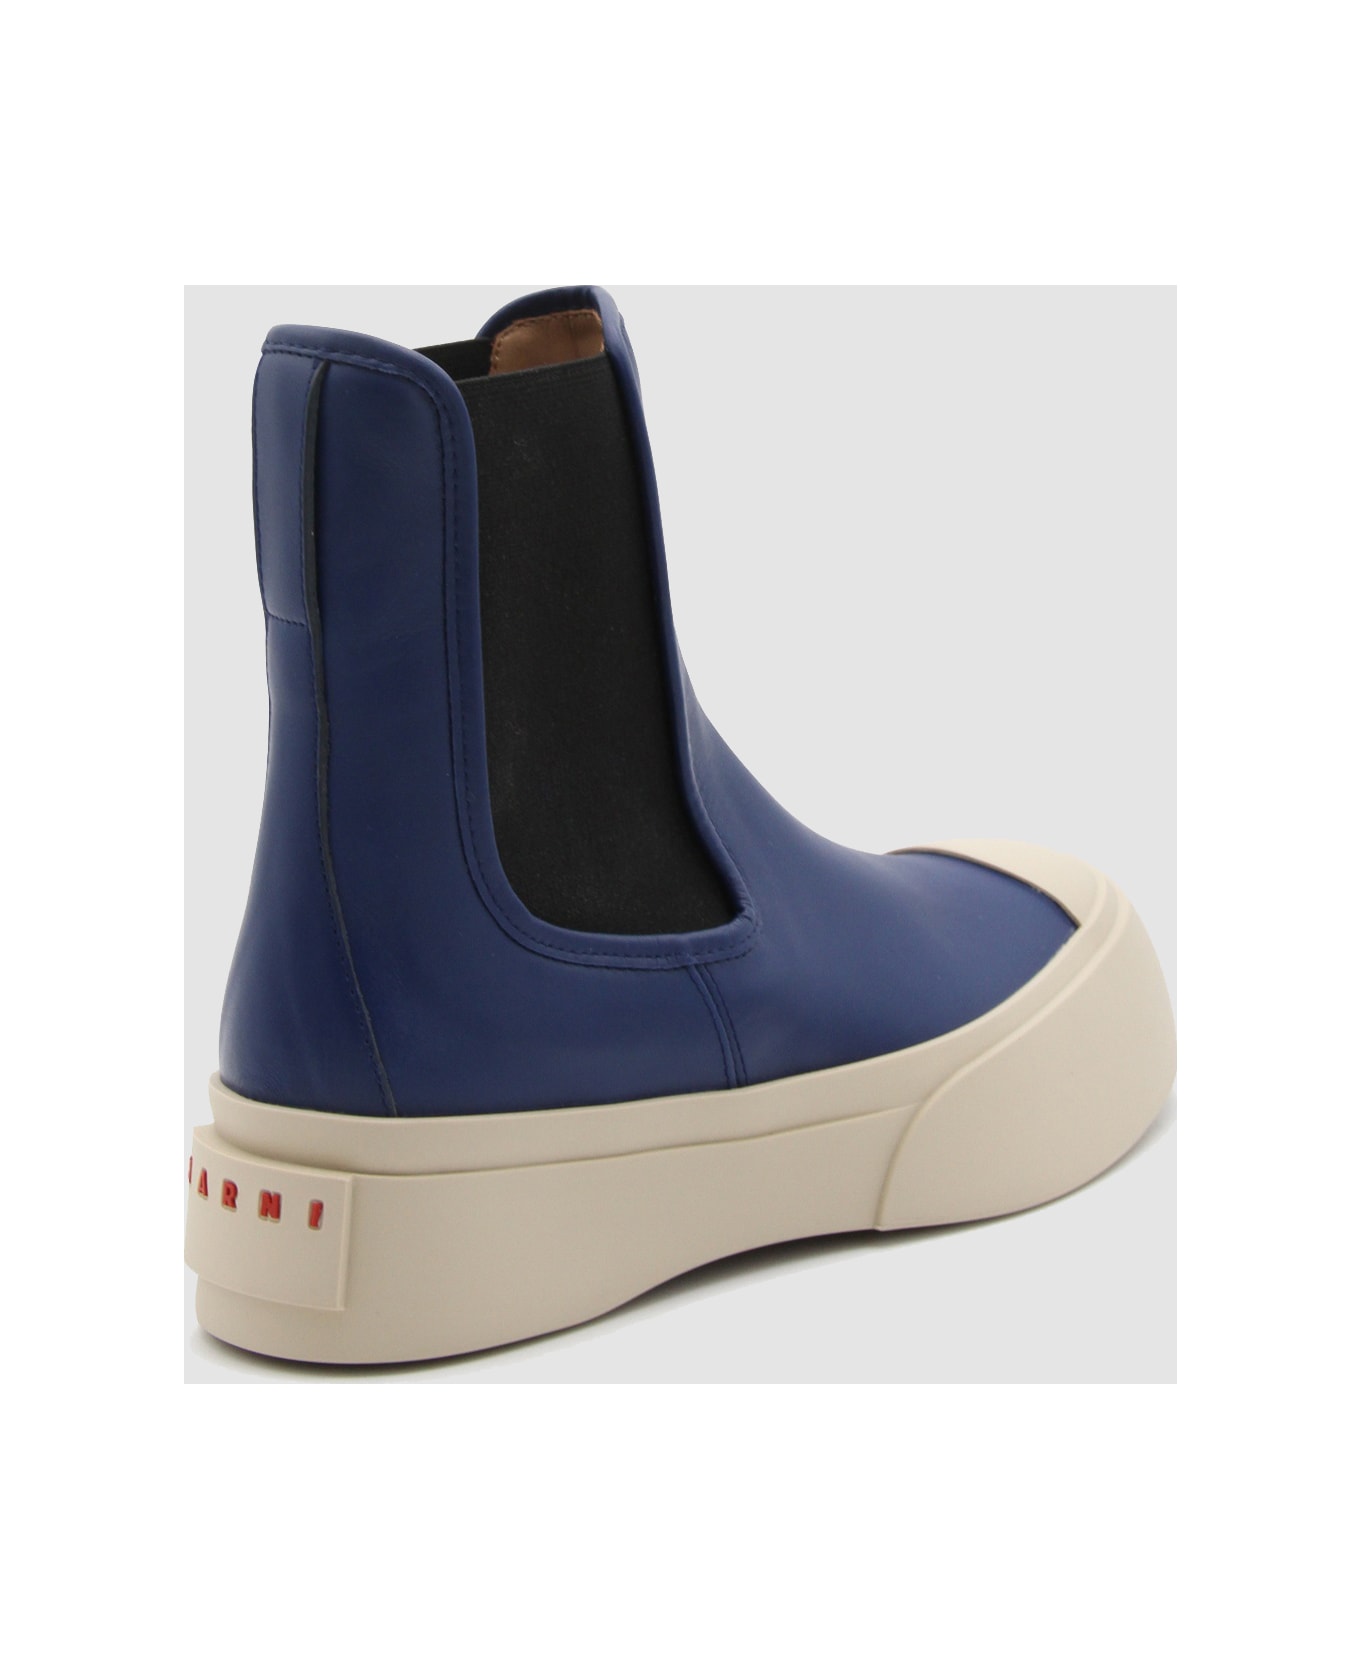 Marni 'pablo' Blue Nappa Leather Ankle Boots - Blue